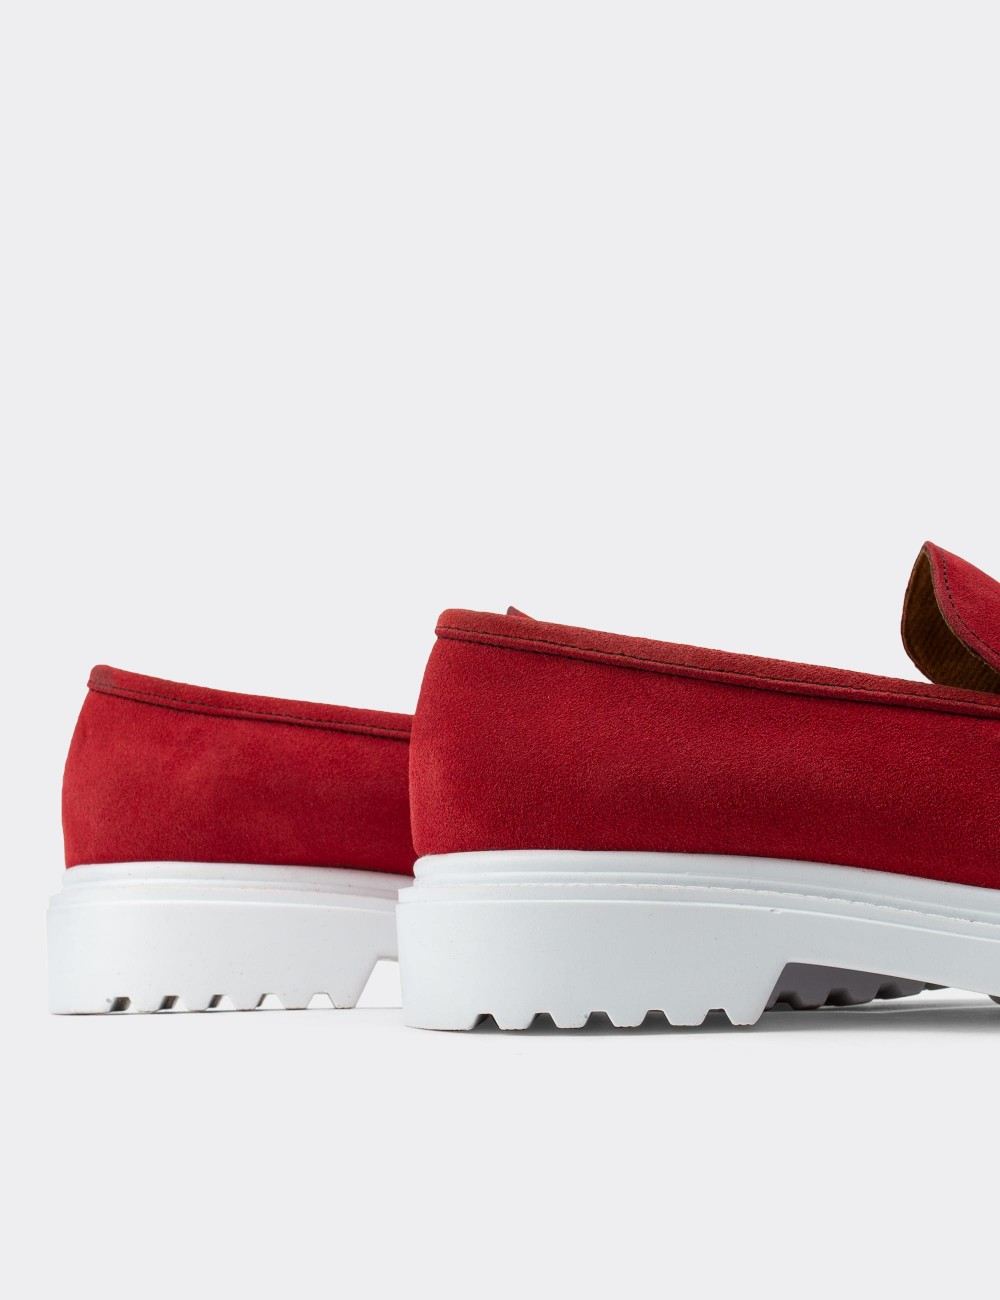 Red Suede Leather Loafers - 01902ZKRMP01